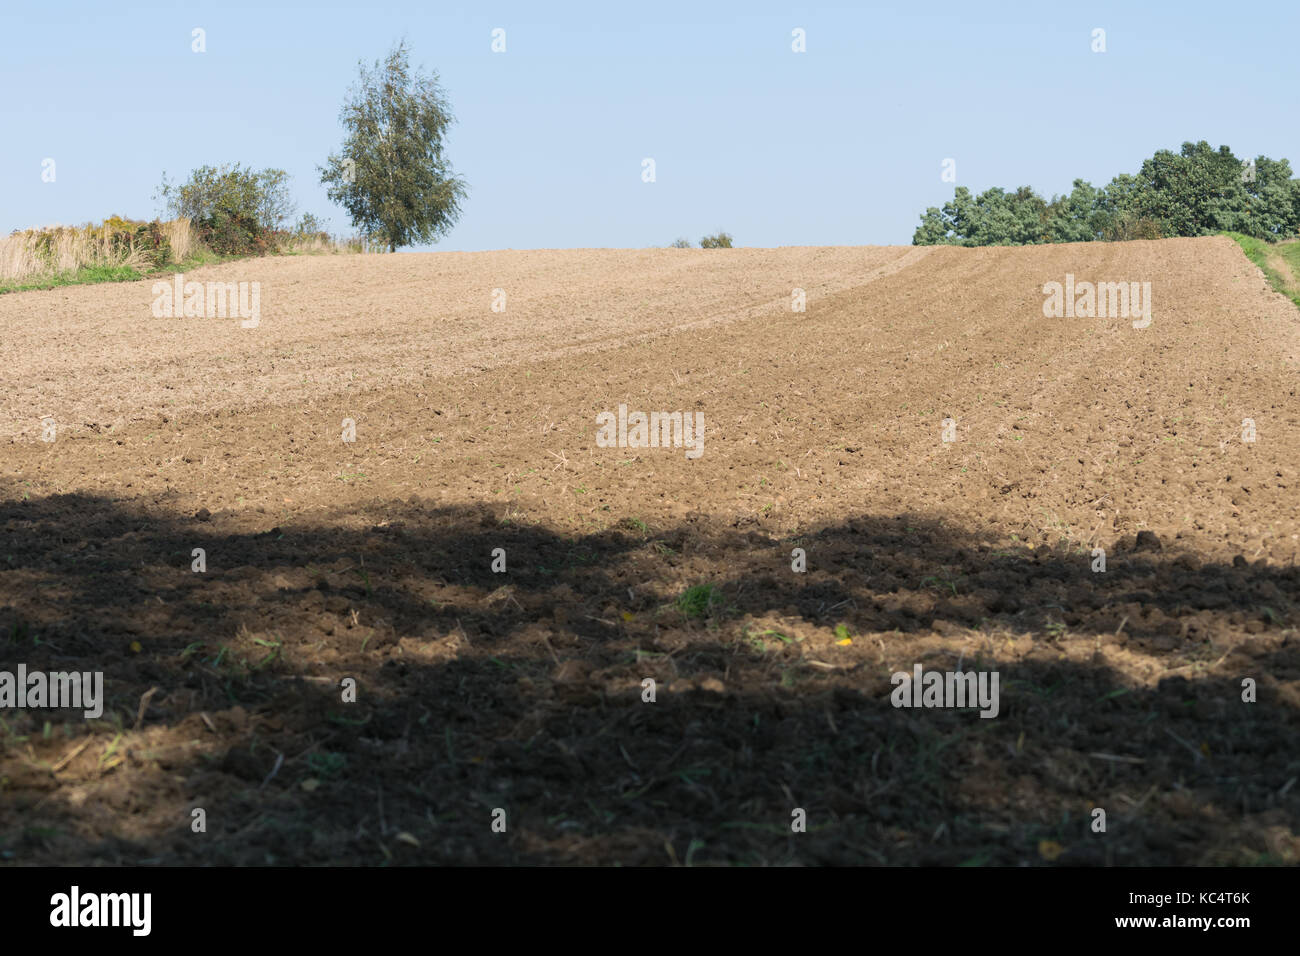 Grain Drill High Resolution Stock Photography and Images - Alamy